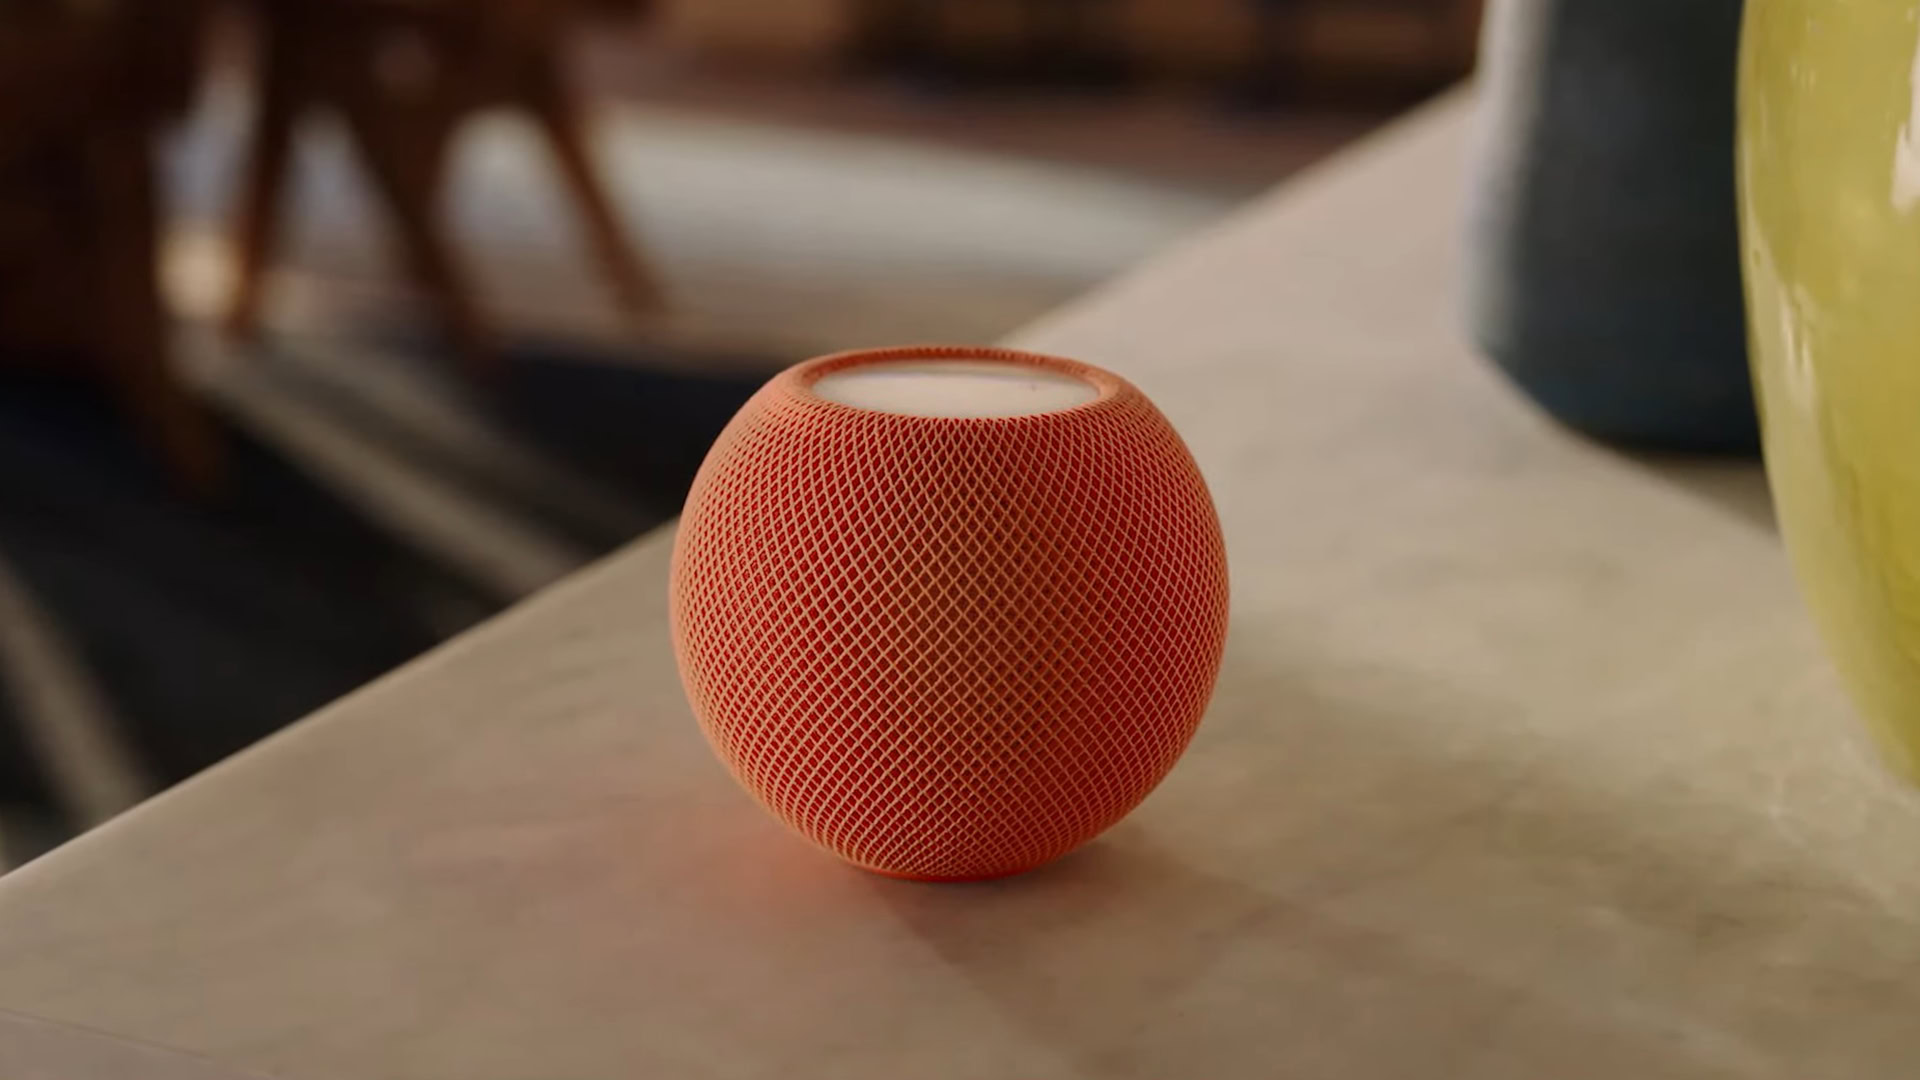 How to set up an Apple HomePod or HomePod mini - Android Authority